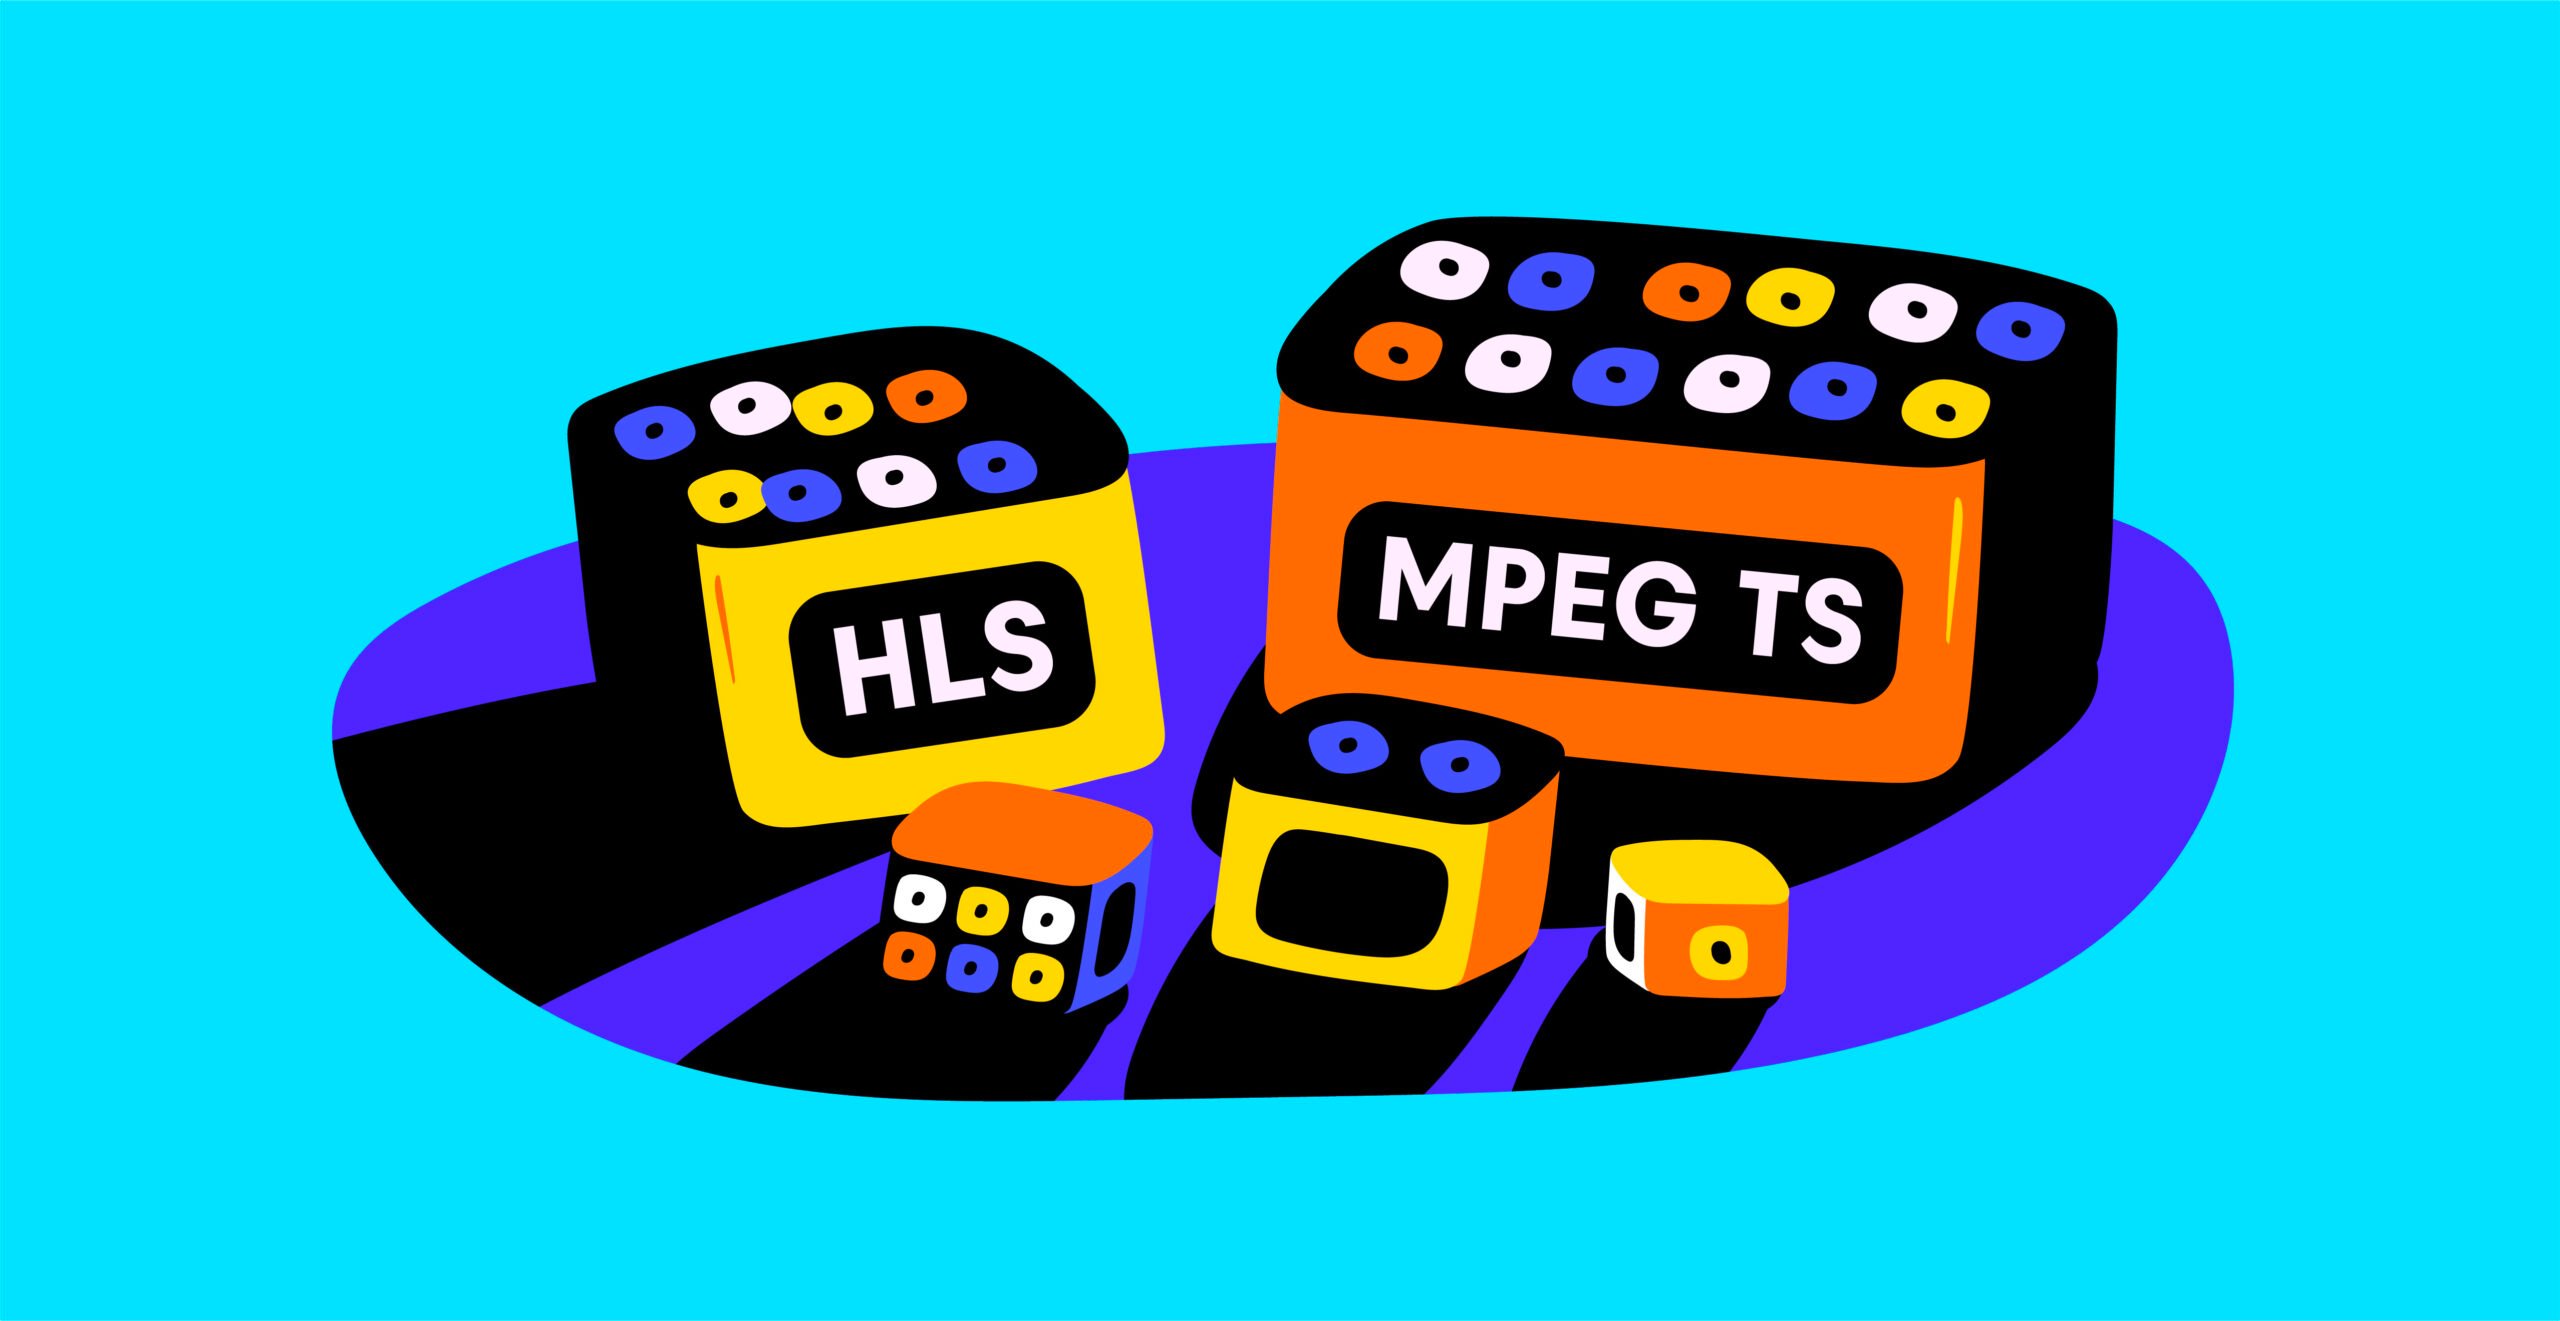 MPEG TS vs. HLS: Which Streaming Protocol Reigns Supreme?